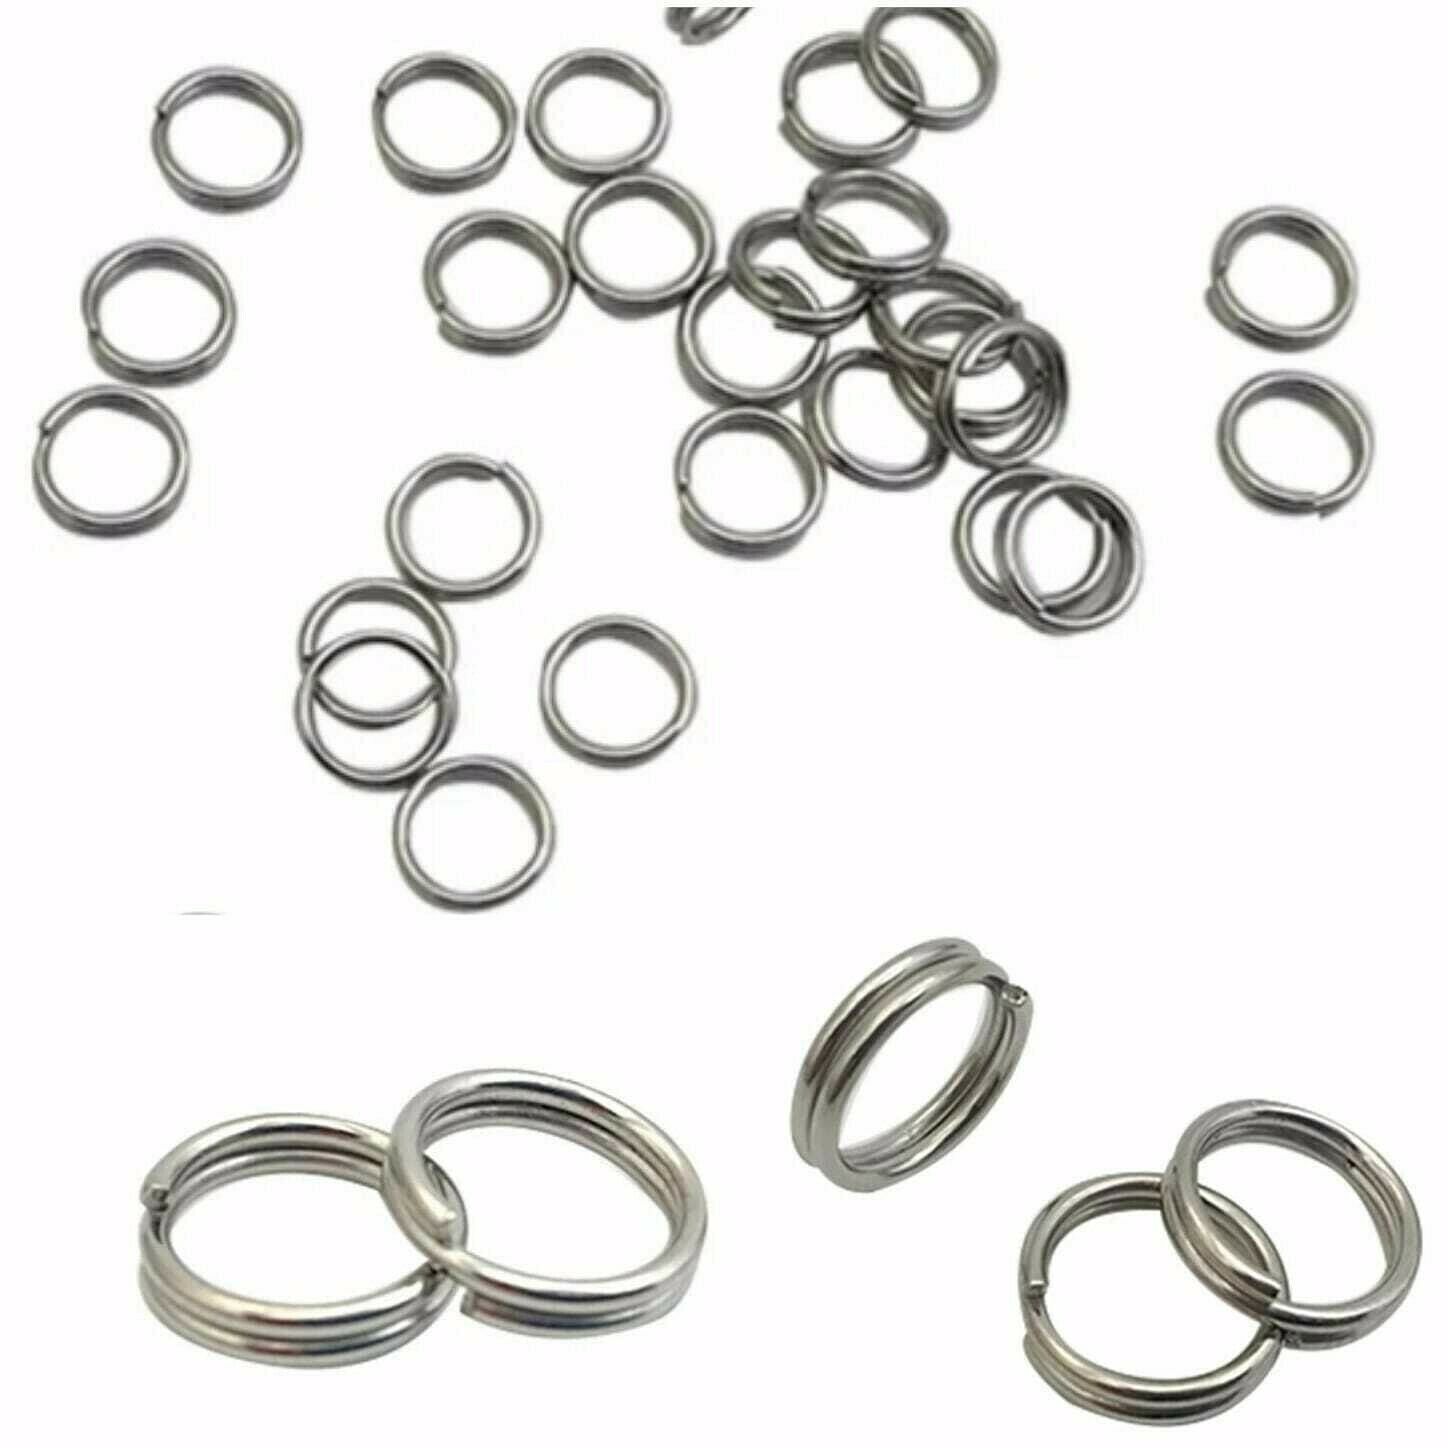 Thick Strong STAINLESS STEEL 10mm Keyring 'Split Rings' Key Chain Links Rhodium